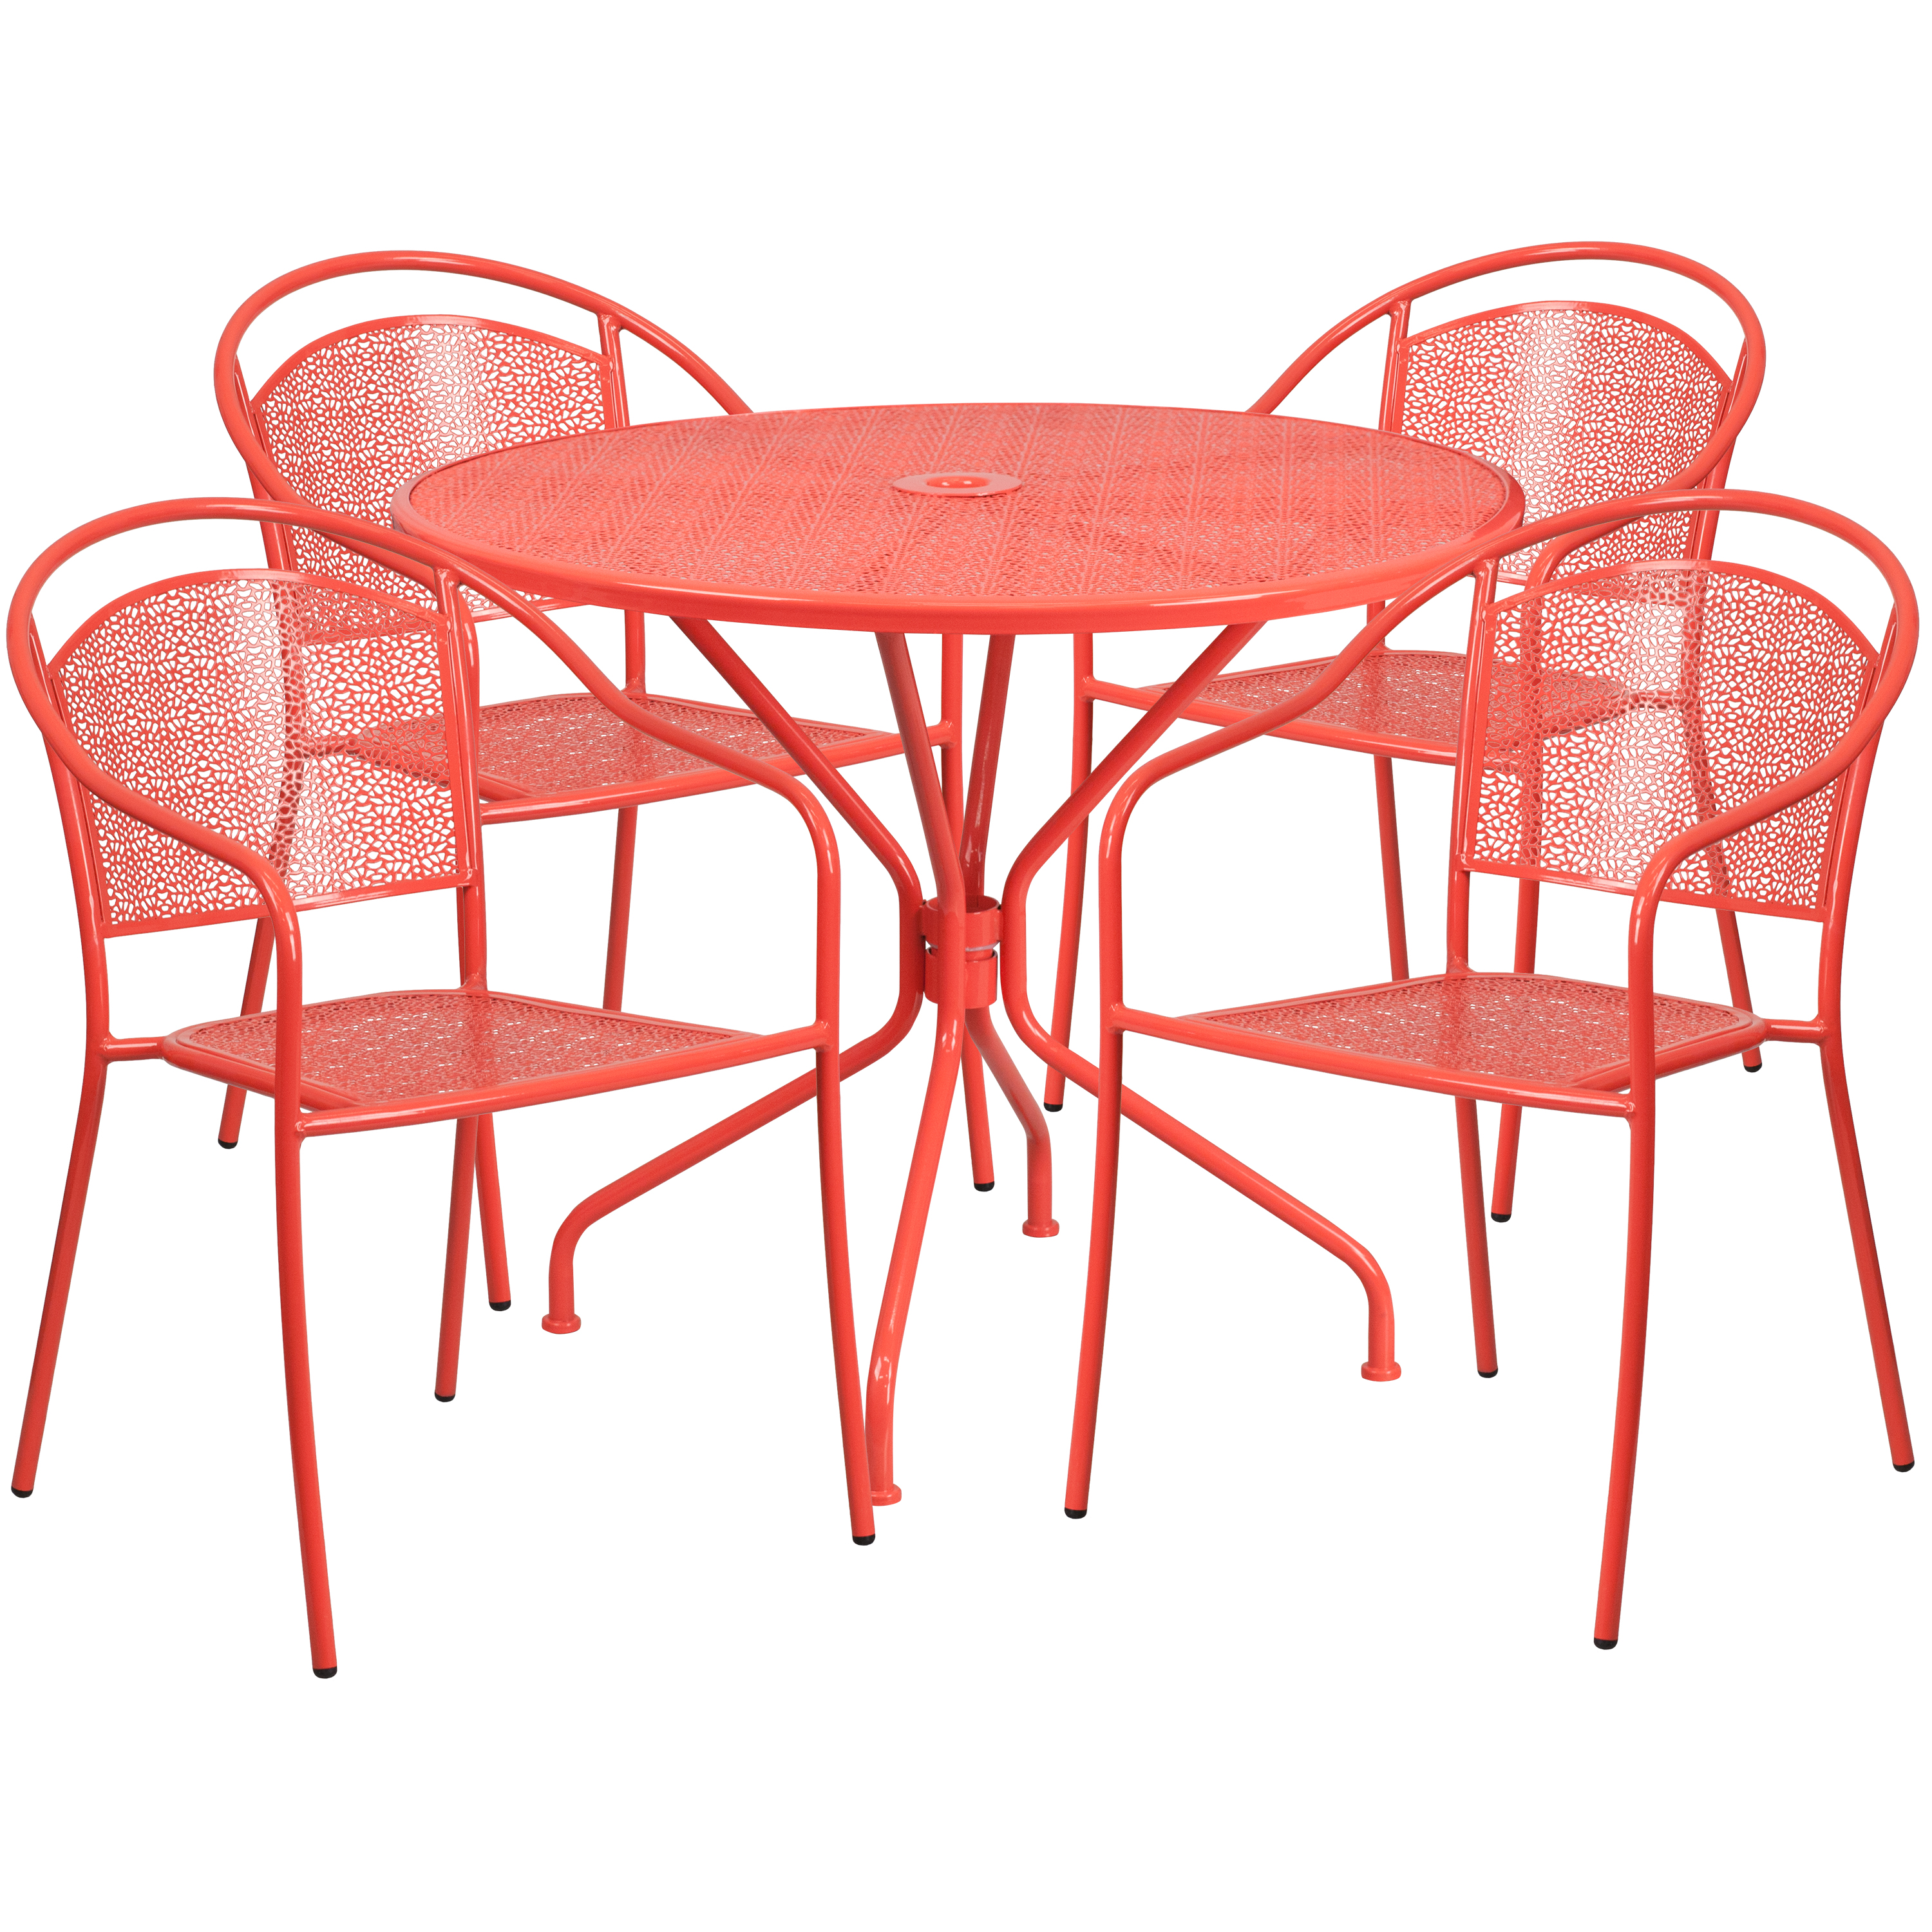 Flash Furniture CO-35RD-03CHR4-RED-GG 35.25" Round Coral Indoor/Outdoor Steel Patio Table Set with 4 Round Back Chairs